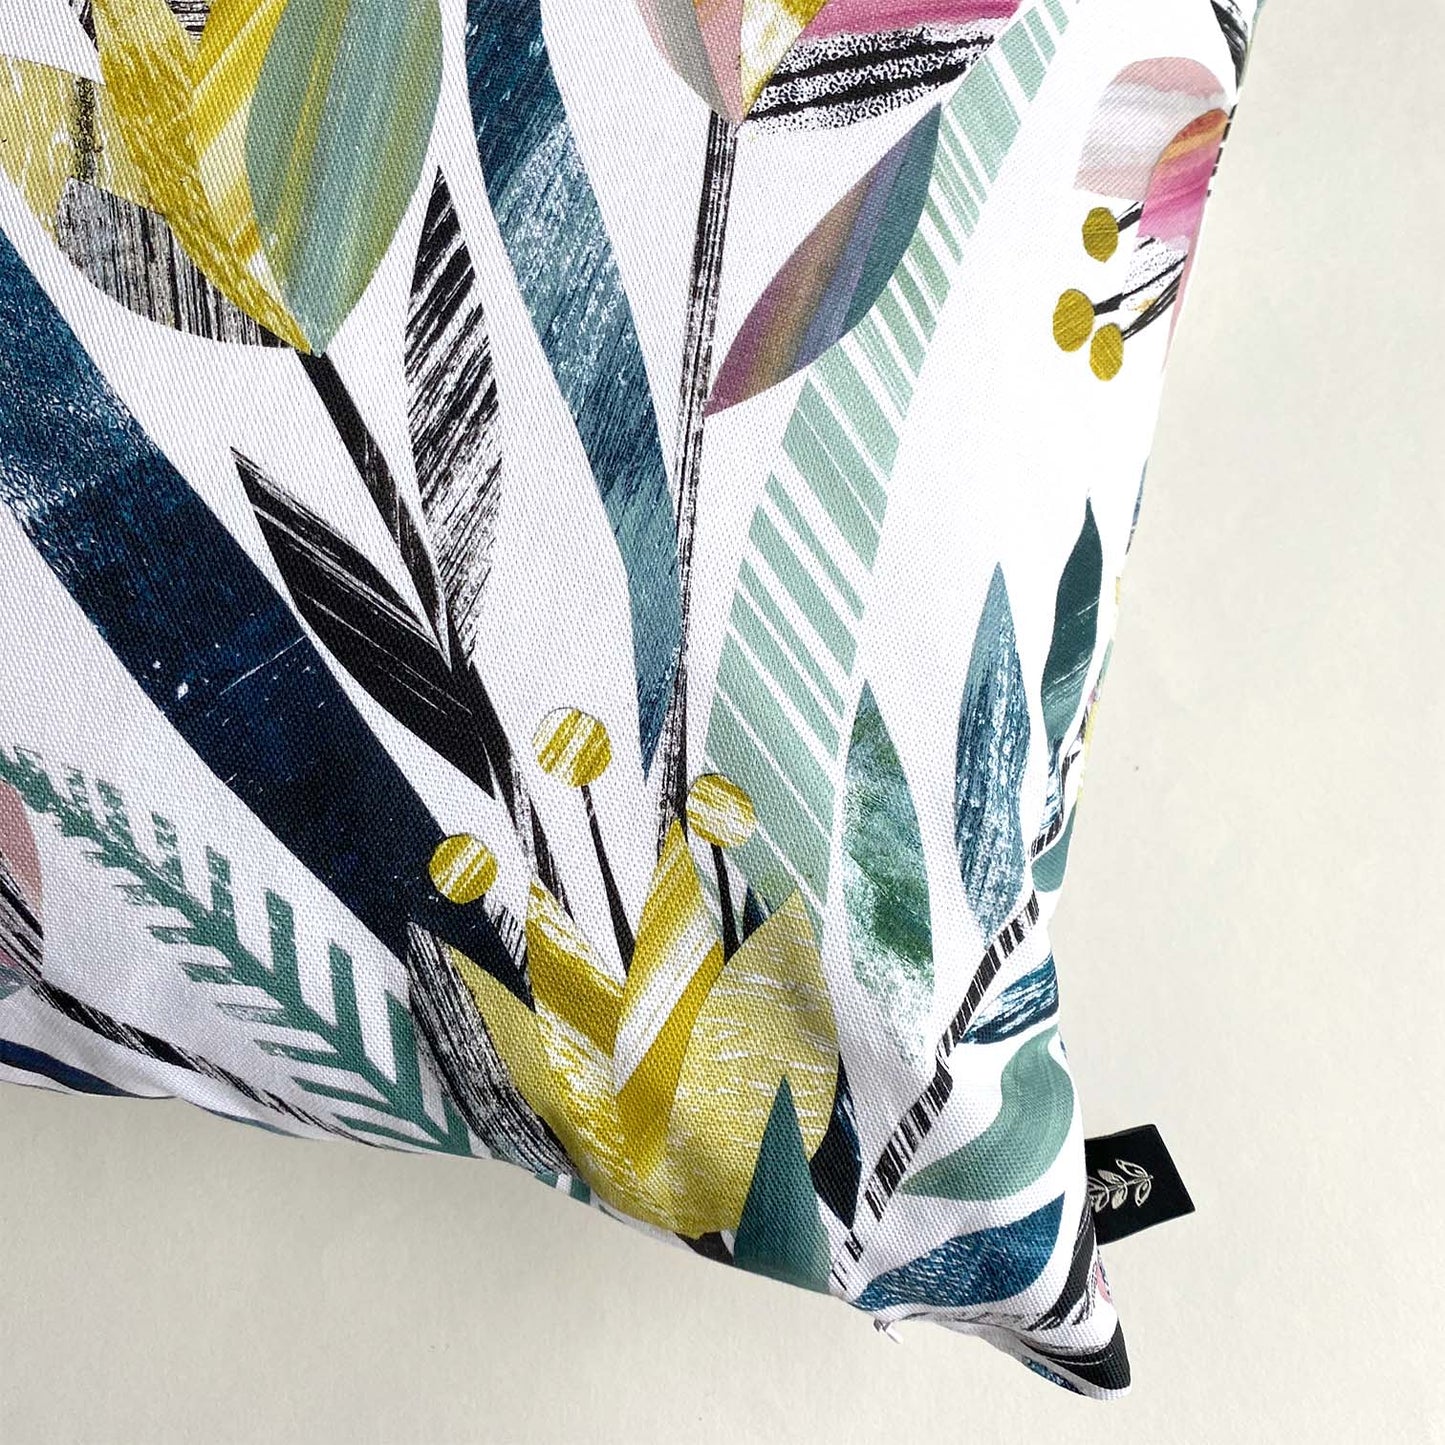 Corner of the Tulips Cushion, showing details of the Yellow, Pink and green tulip print and a Bianca Williams Design Brand label.